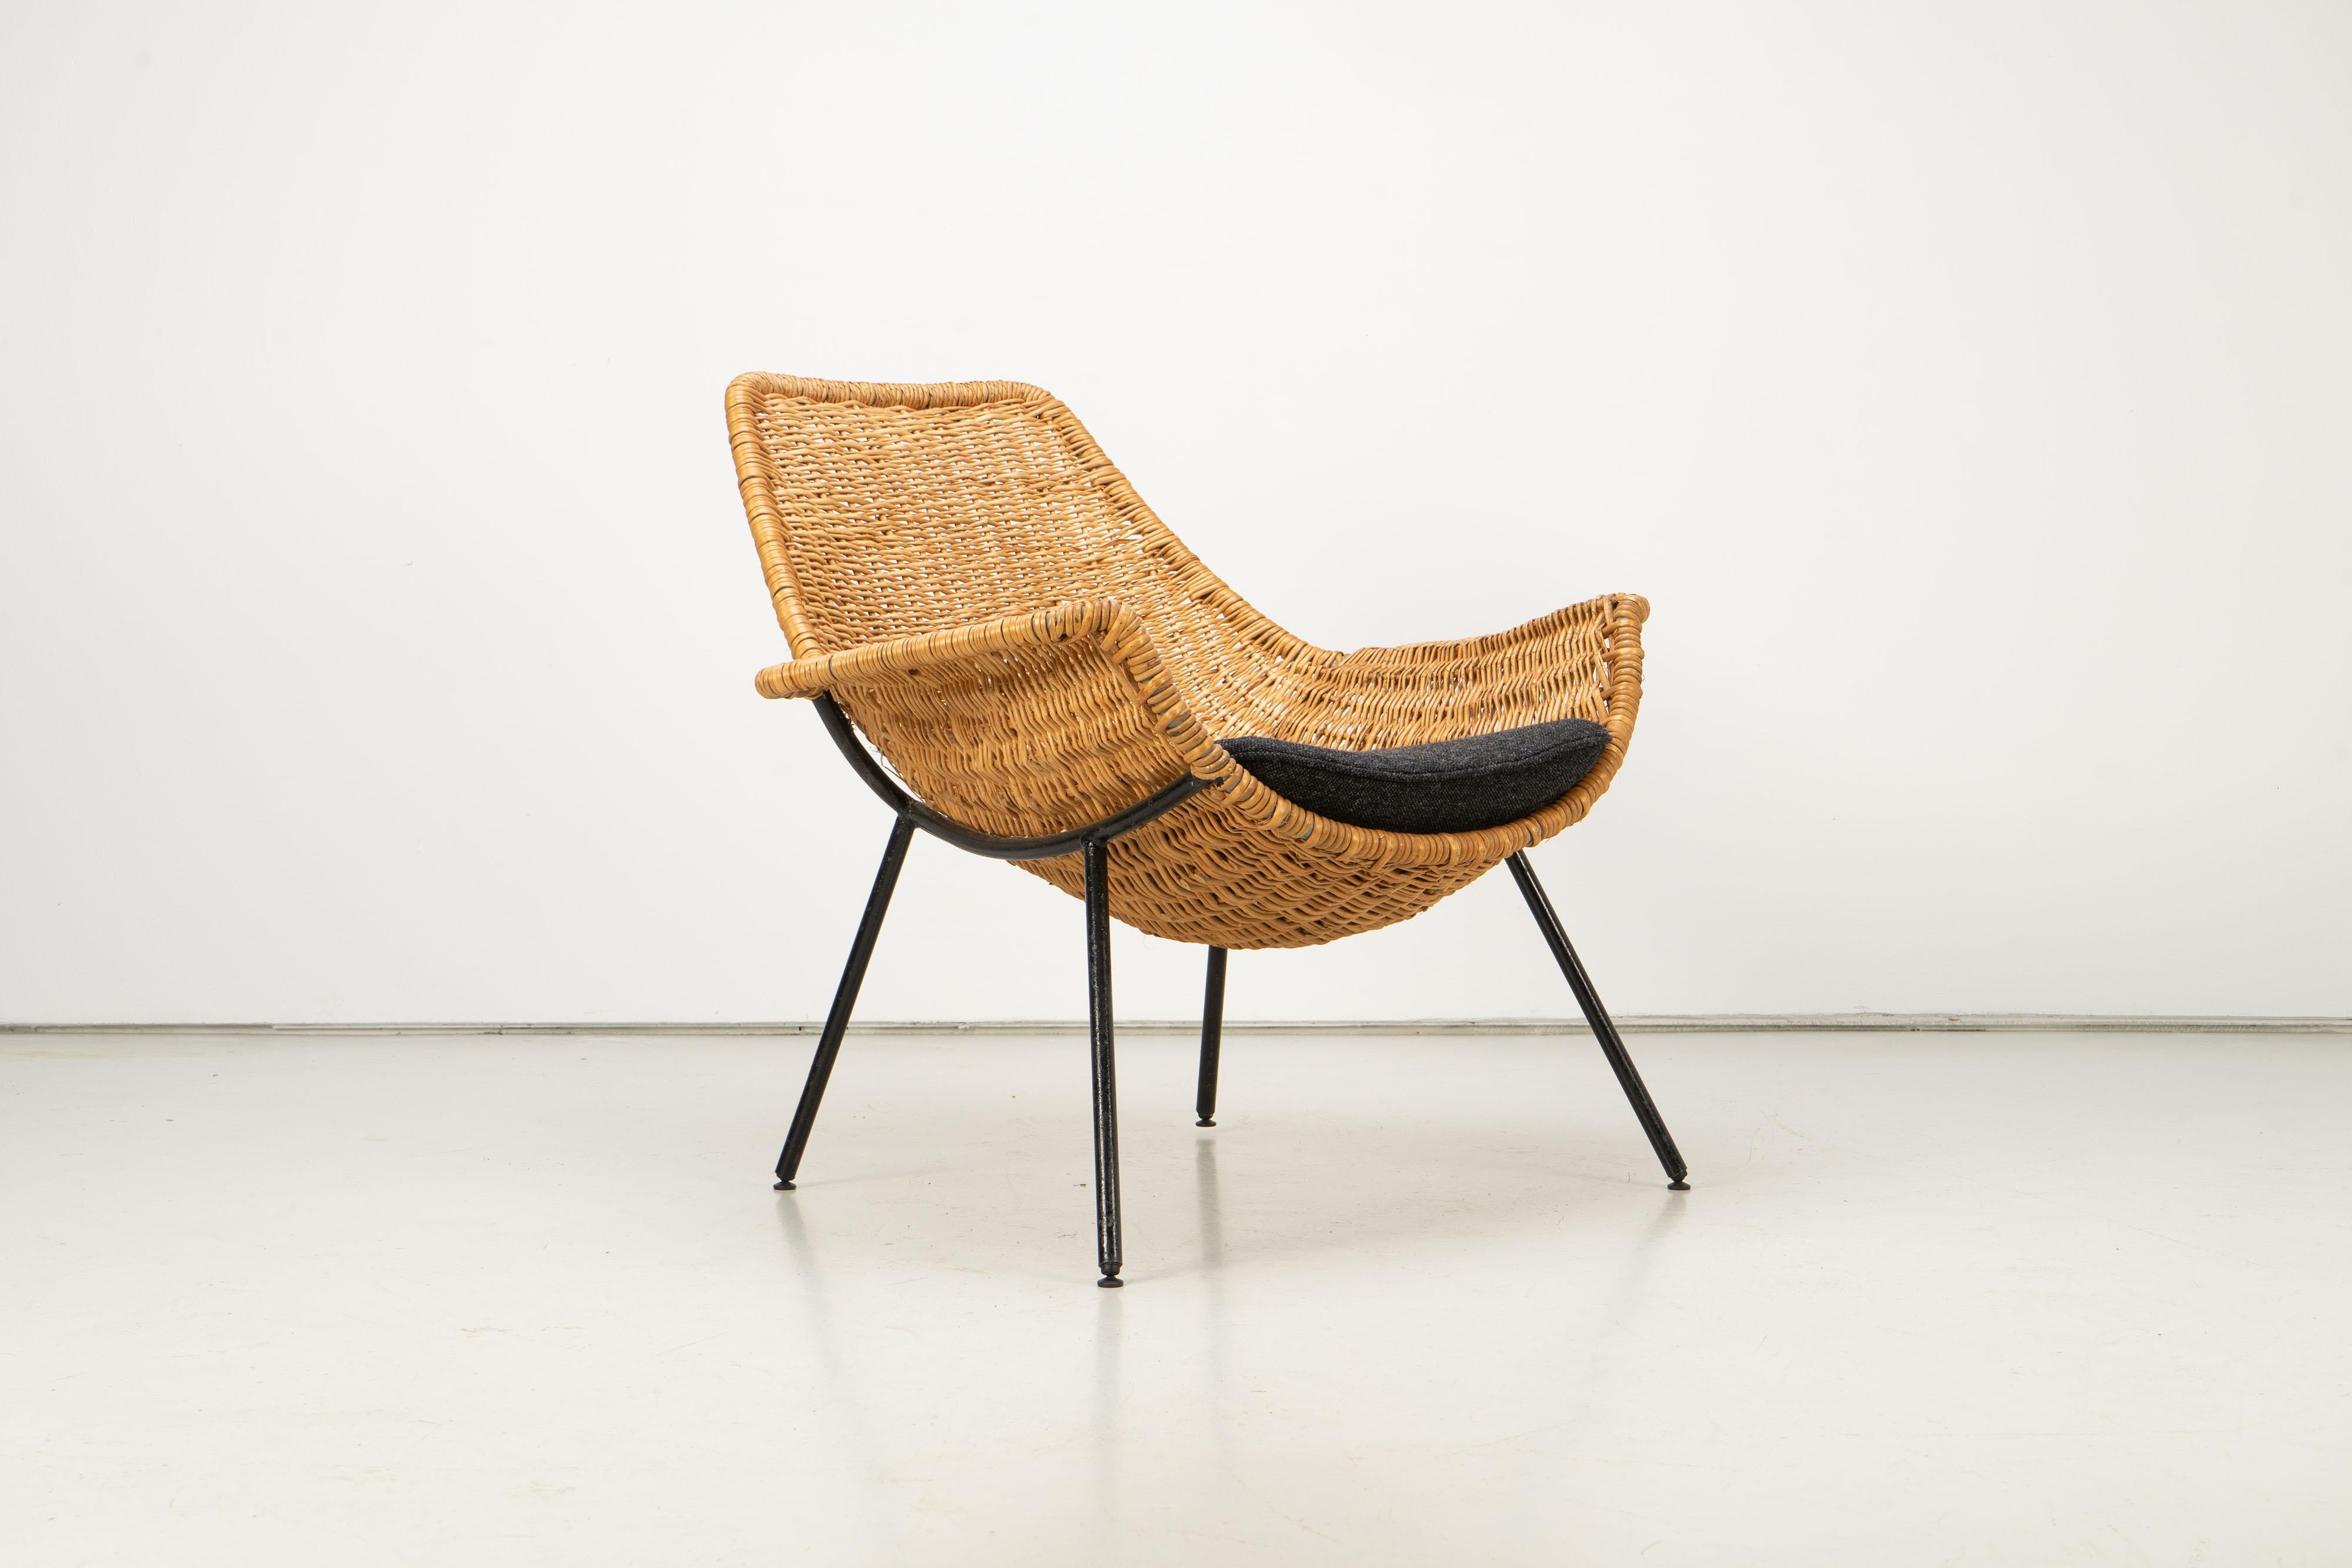 Steel Mid-Century Modern Rattan Lounge Chair by Giancarlo De Carlo Italy, 1954 For Sale